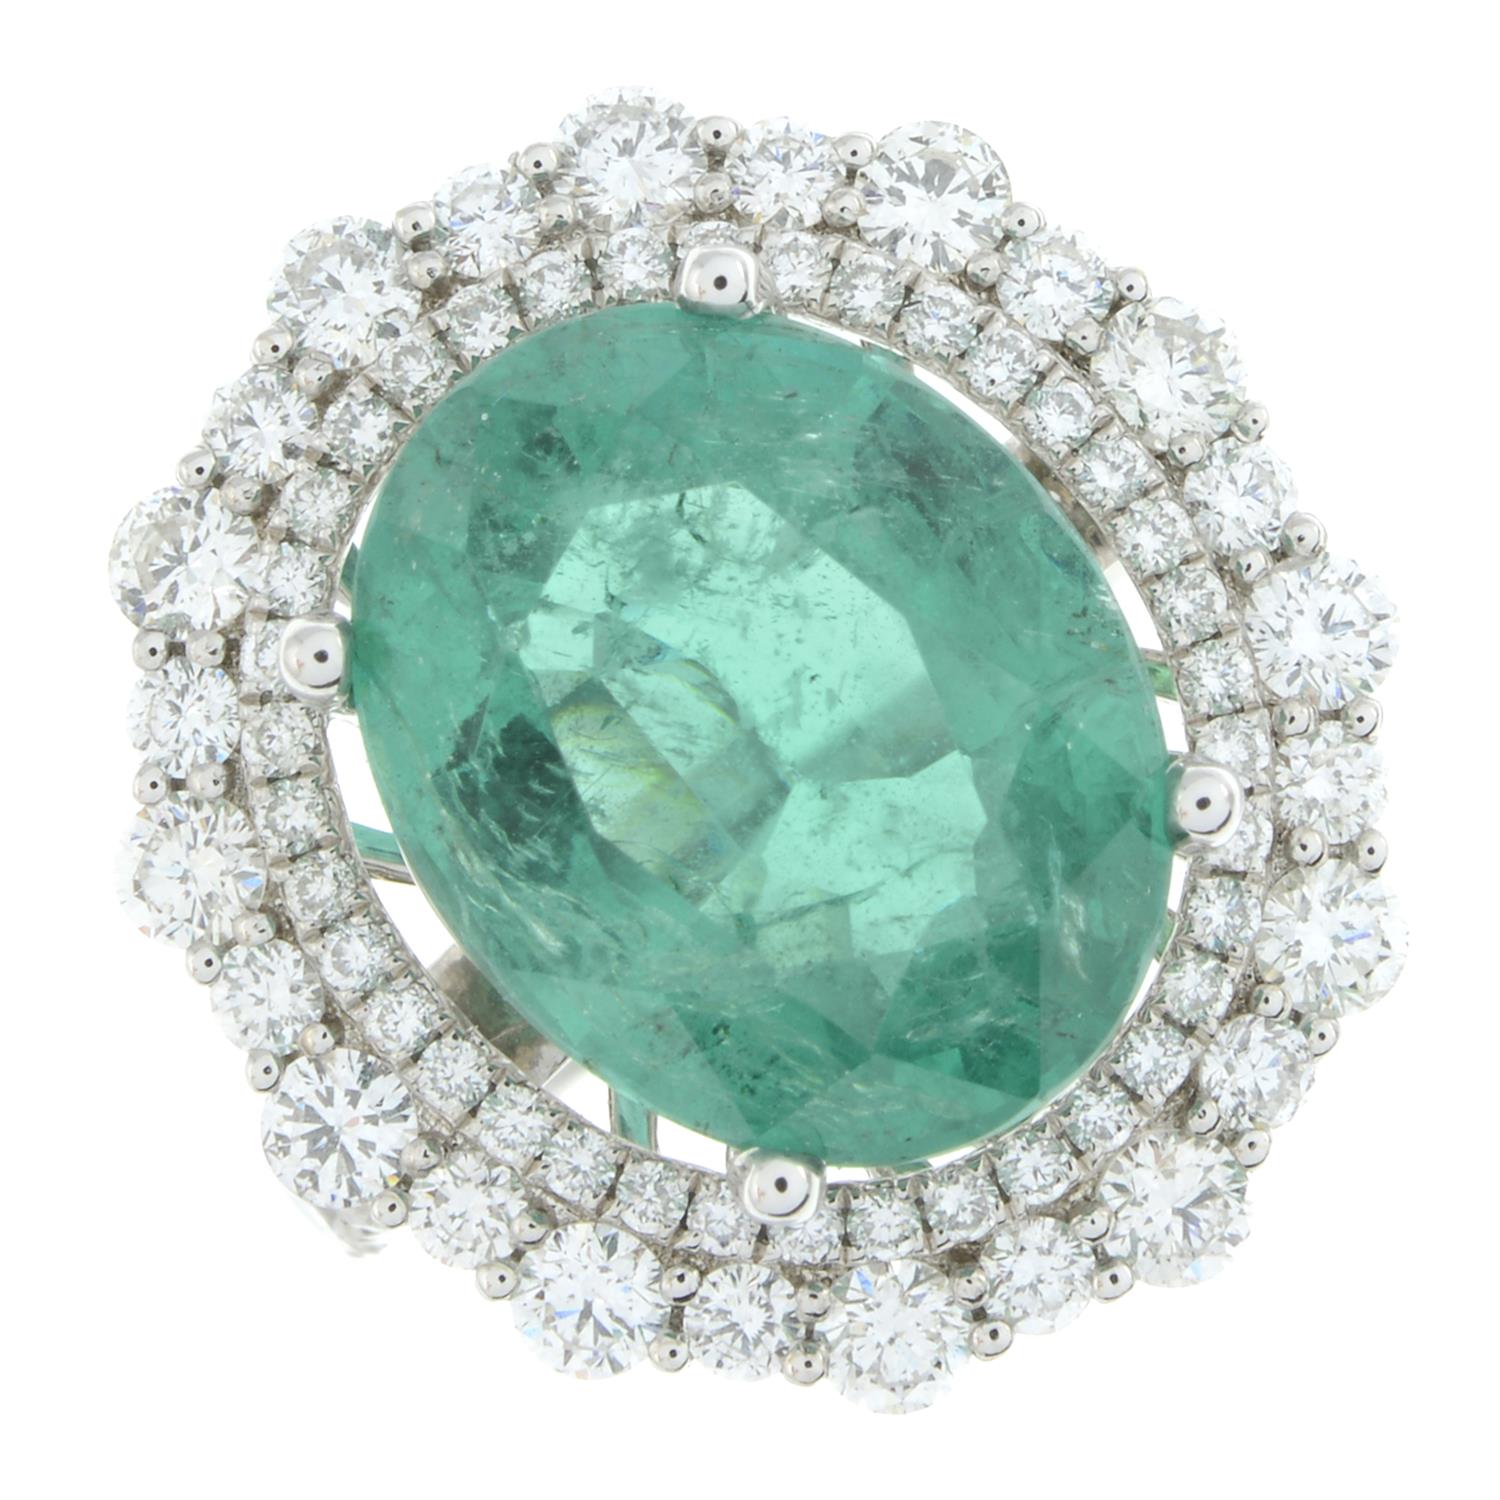 Emerald and diamond ring - Image 2 of 6